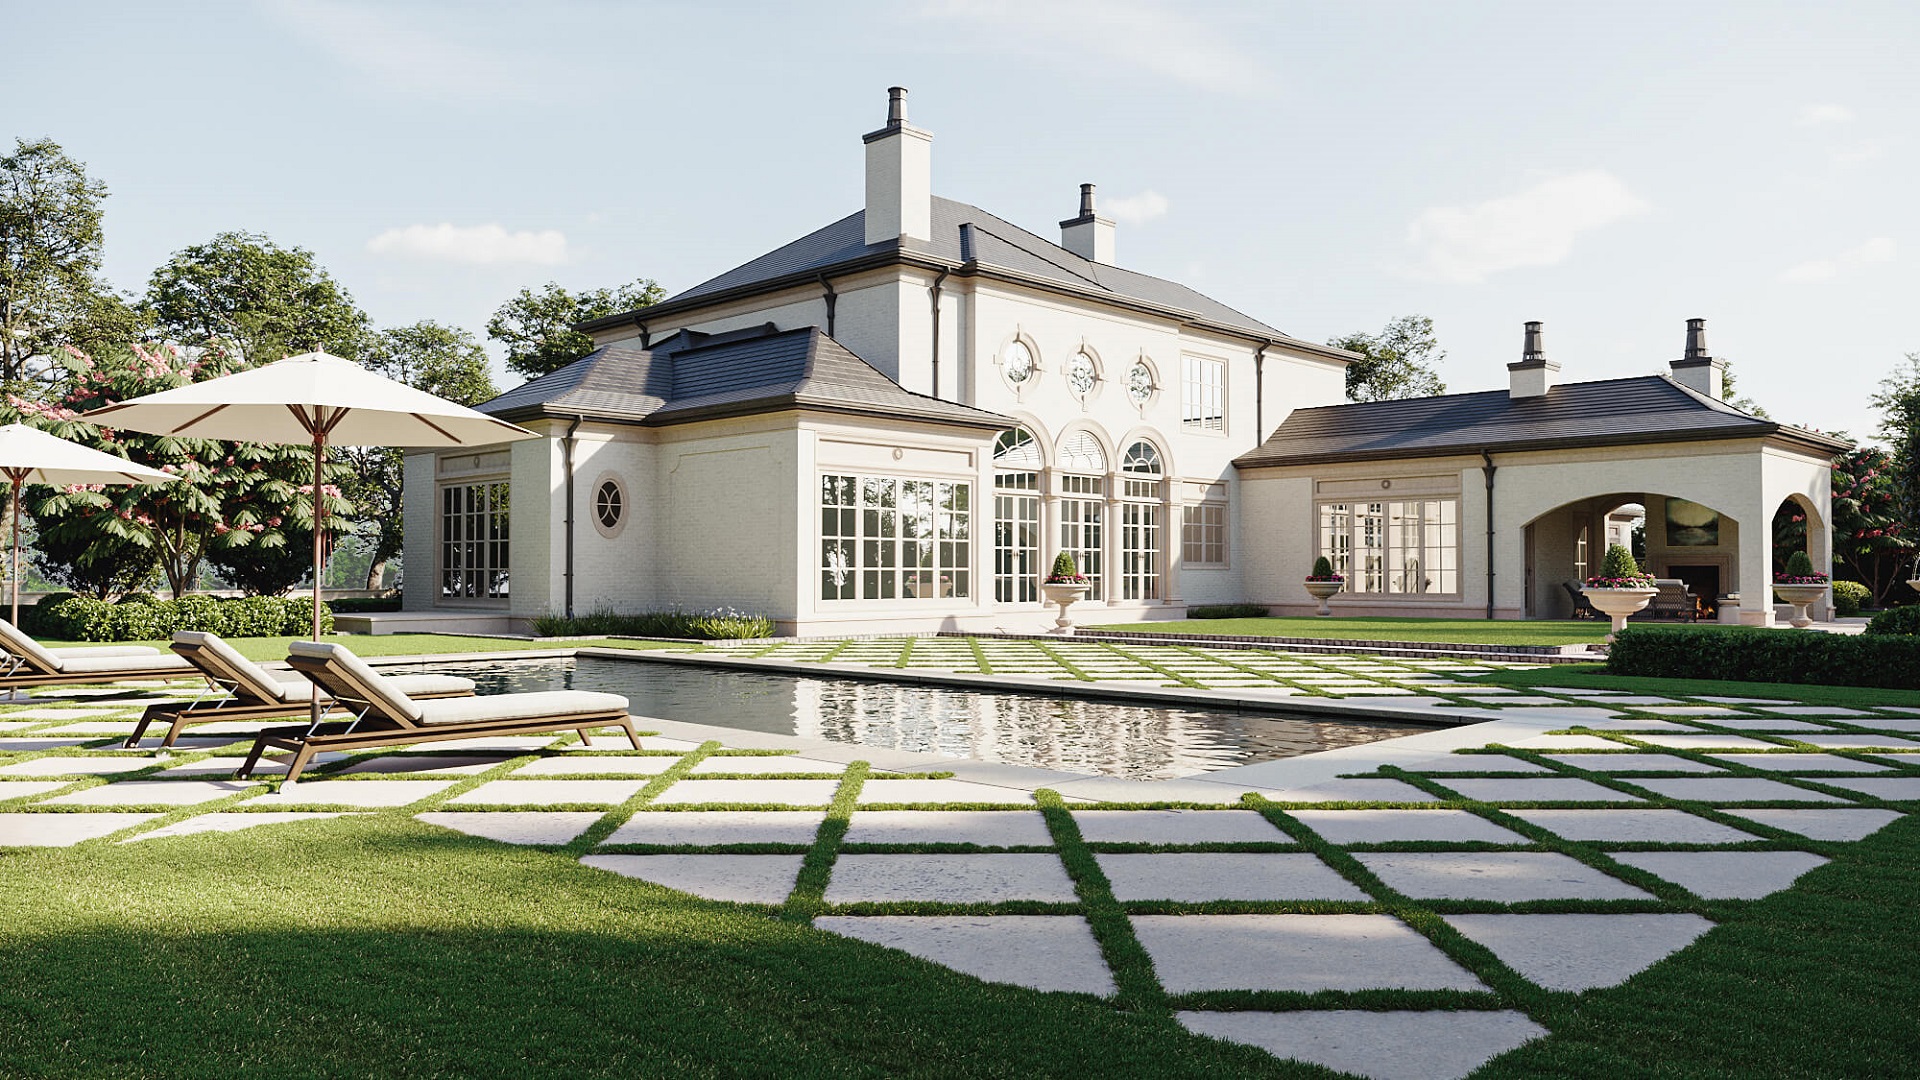 Architectural Visualization of a Mansion